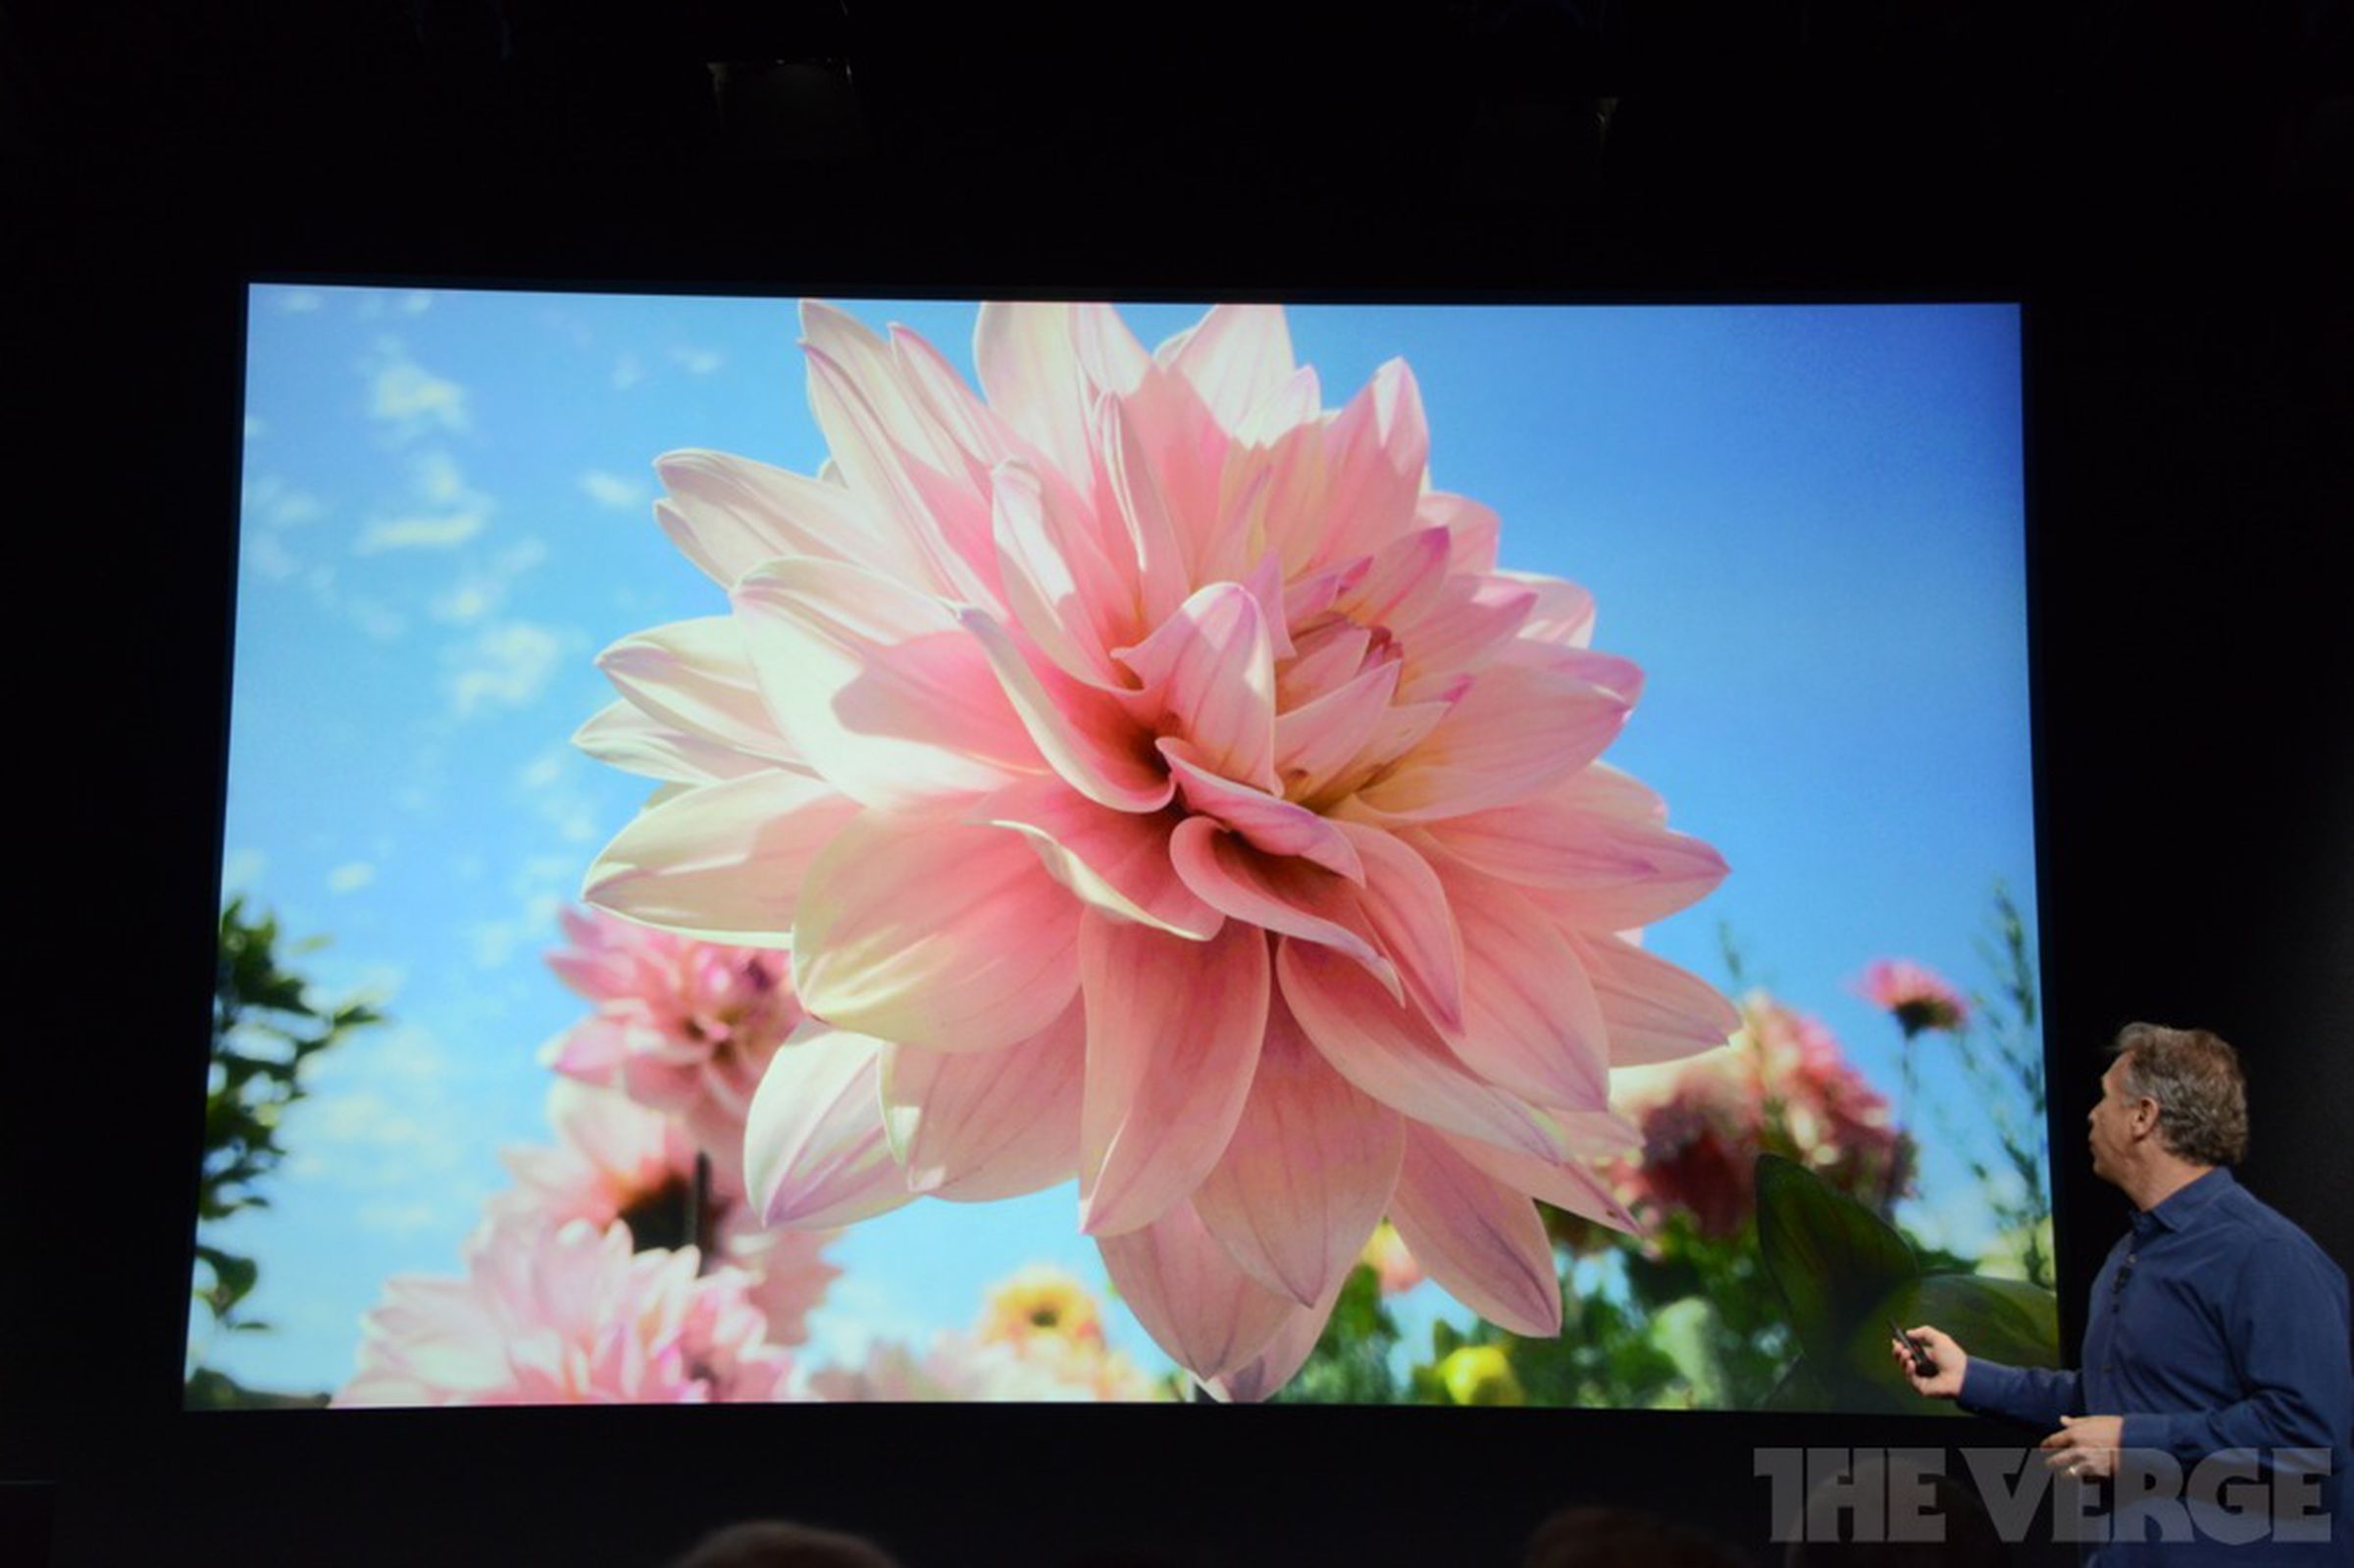 Apple's sample photos from the improved iPhone 5s camera